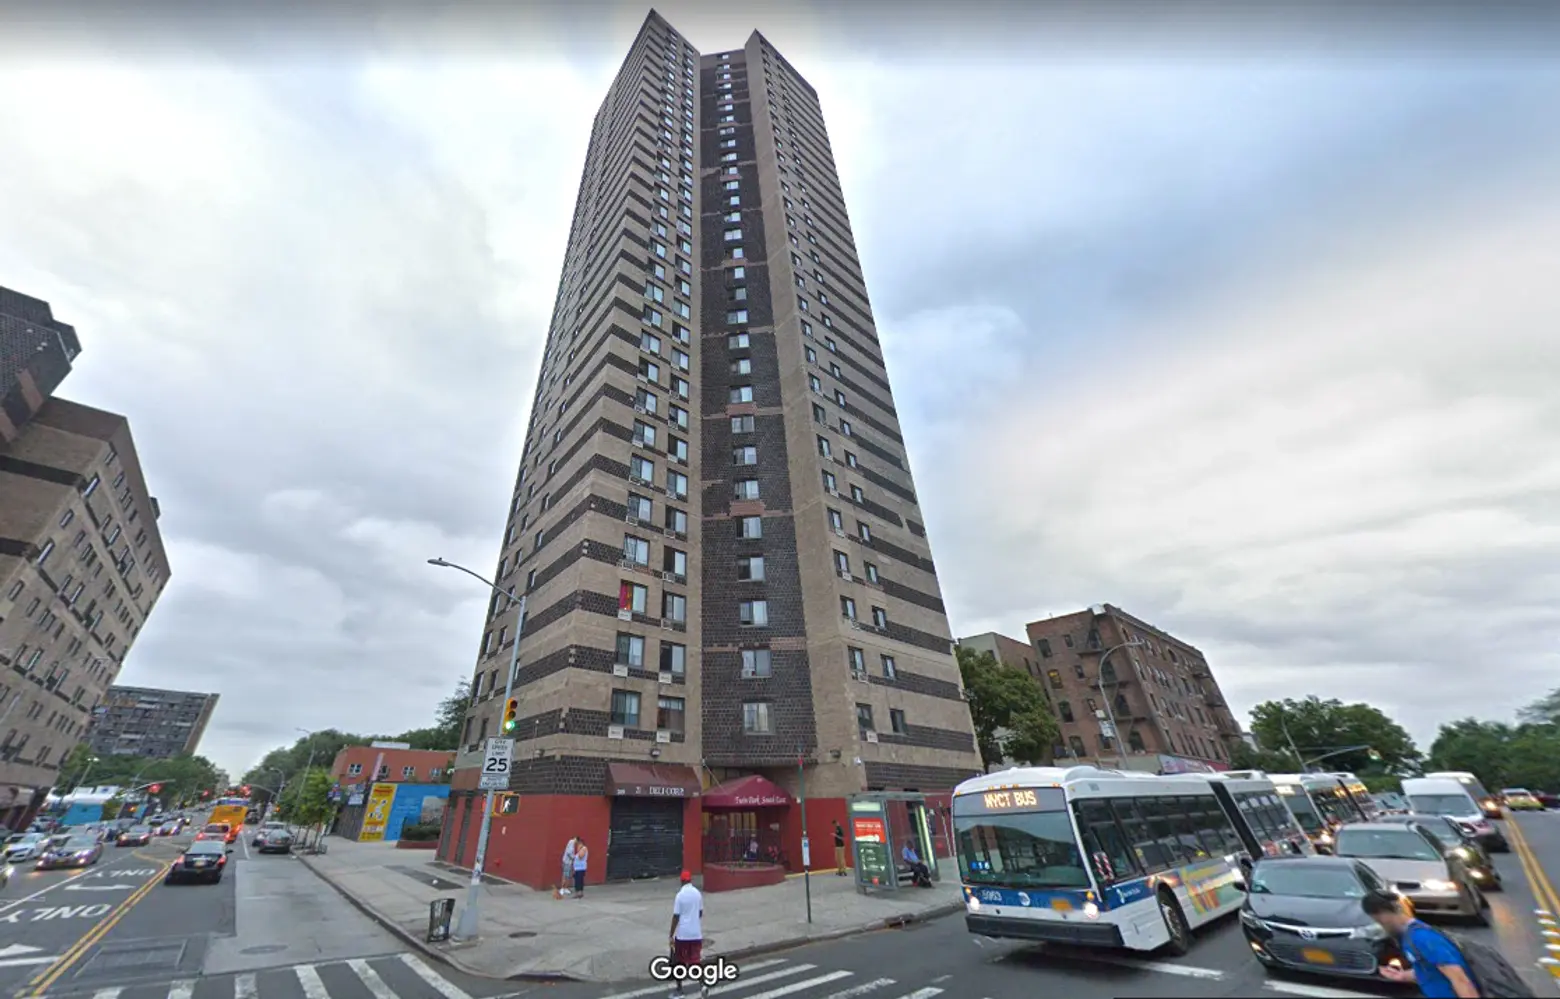 Real estate investors spend $166M on group of Mitchell-Lama buildings in the Bronx